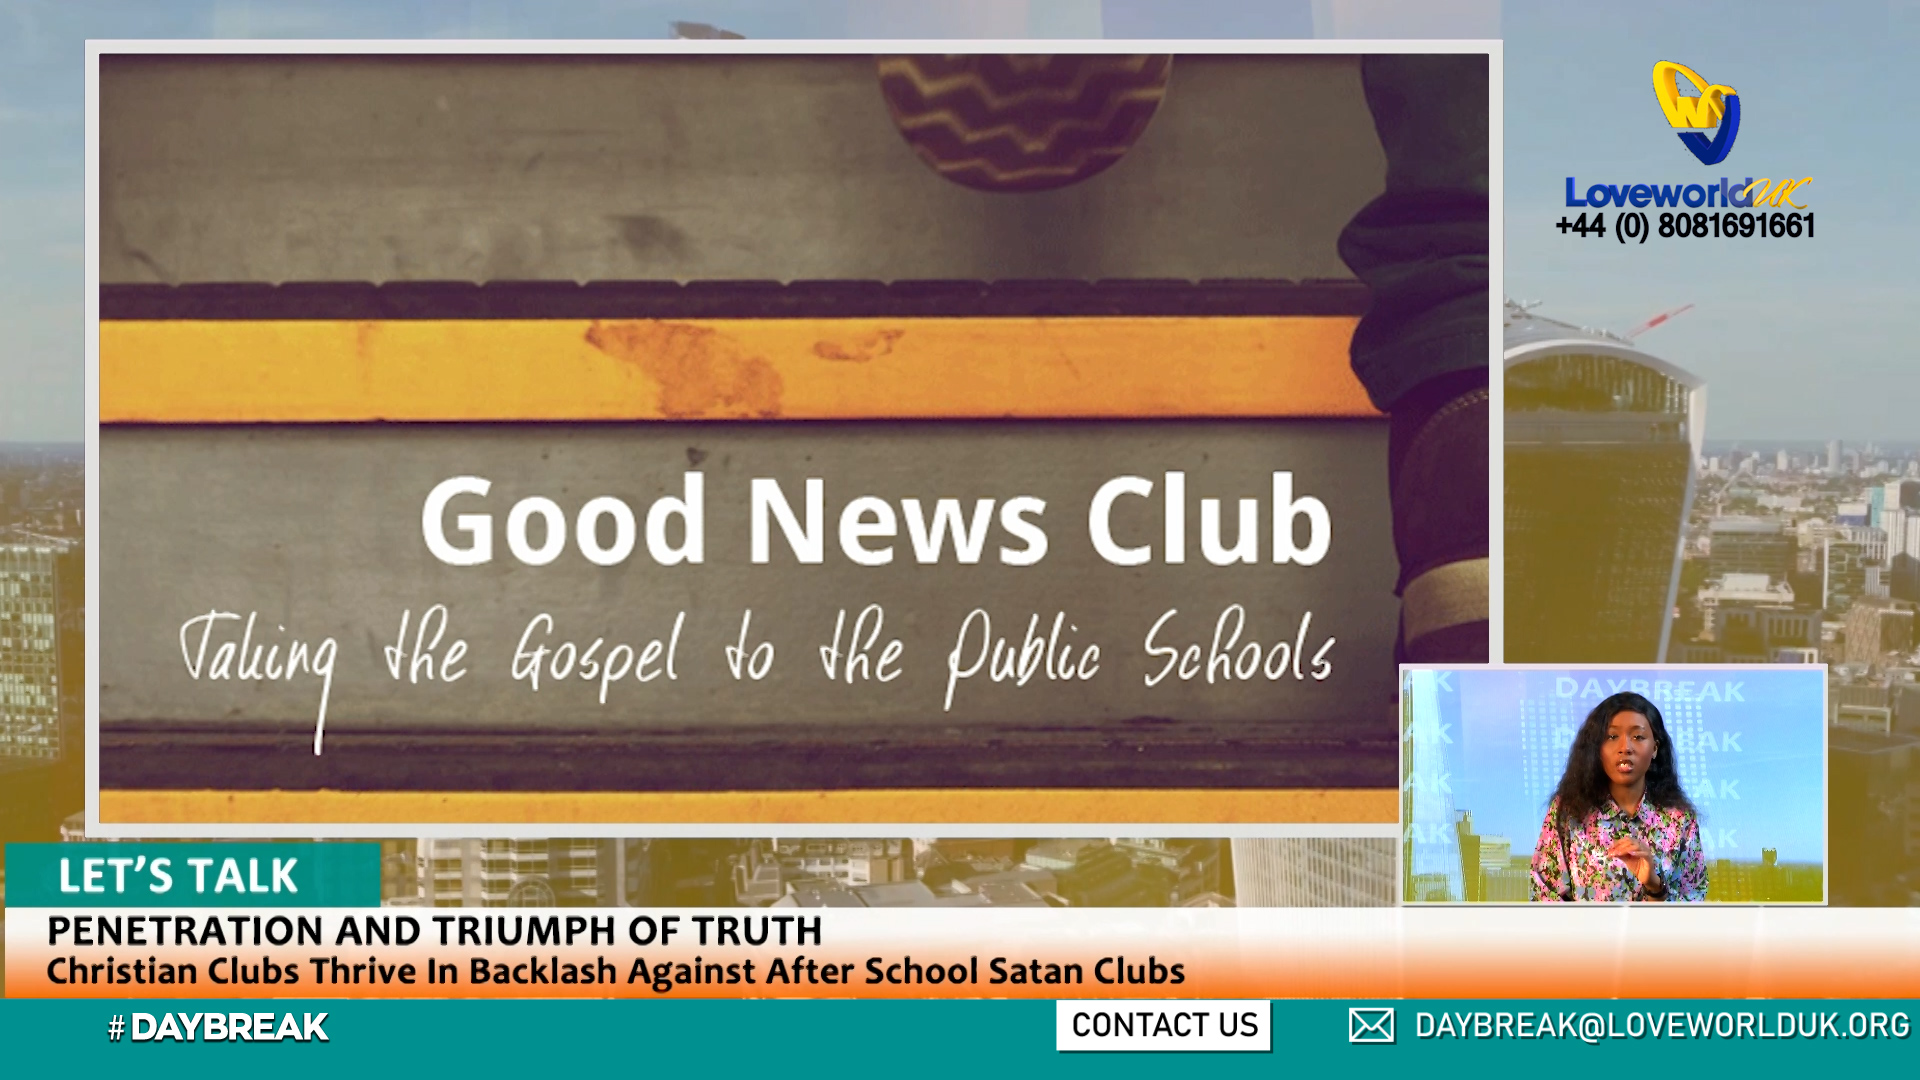 EP 11 - PENETRATION AND TRIUMPH OF TRUTH - Christian Clubs Thrive In Backlash Against After School Satan Clubs